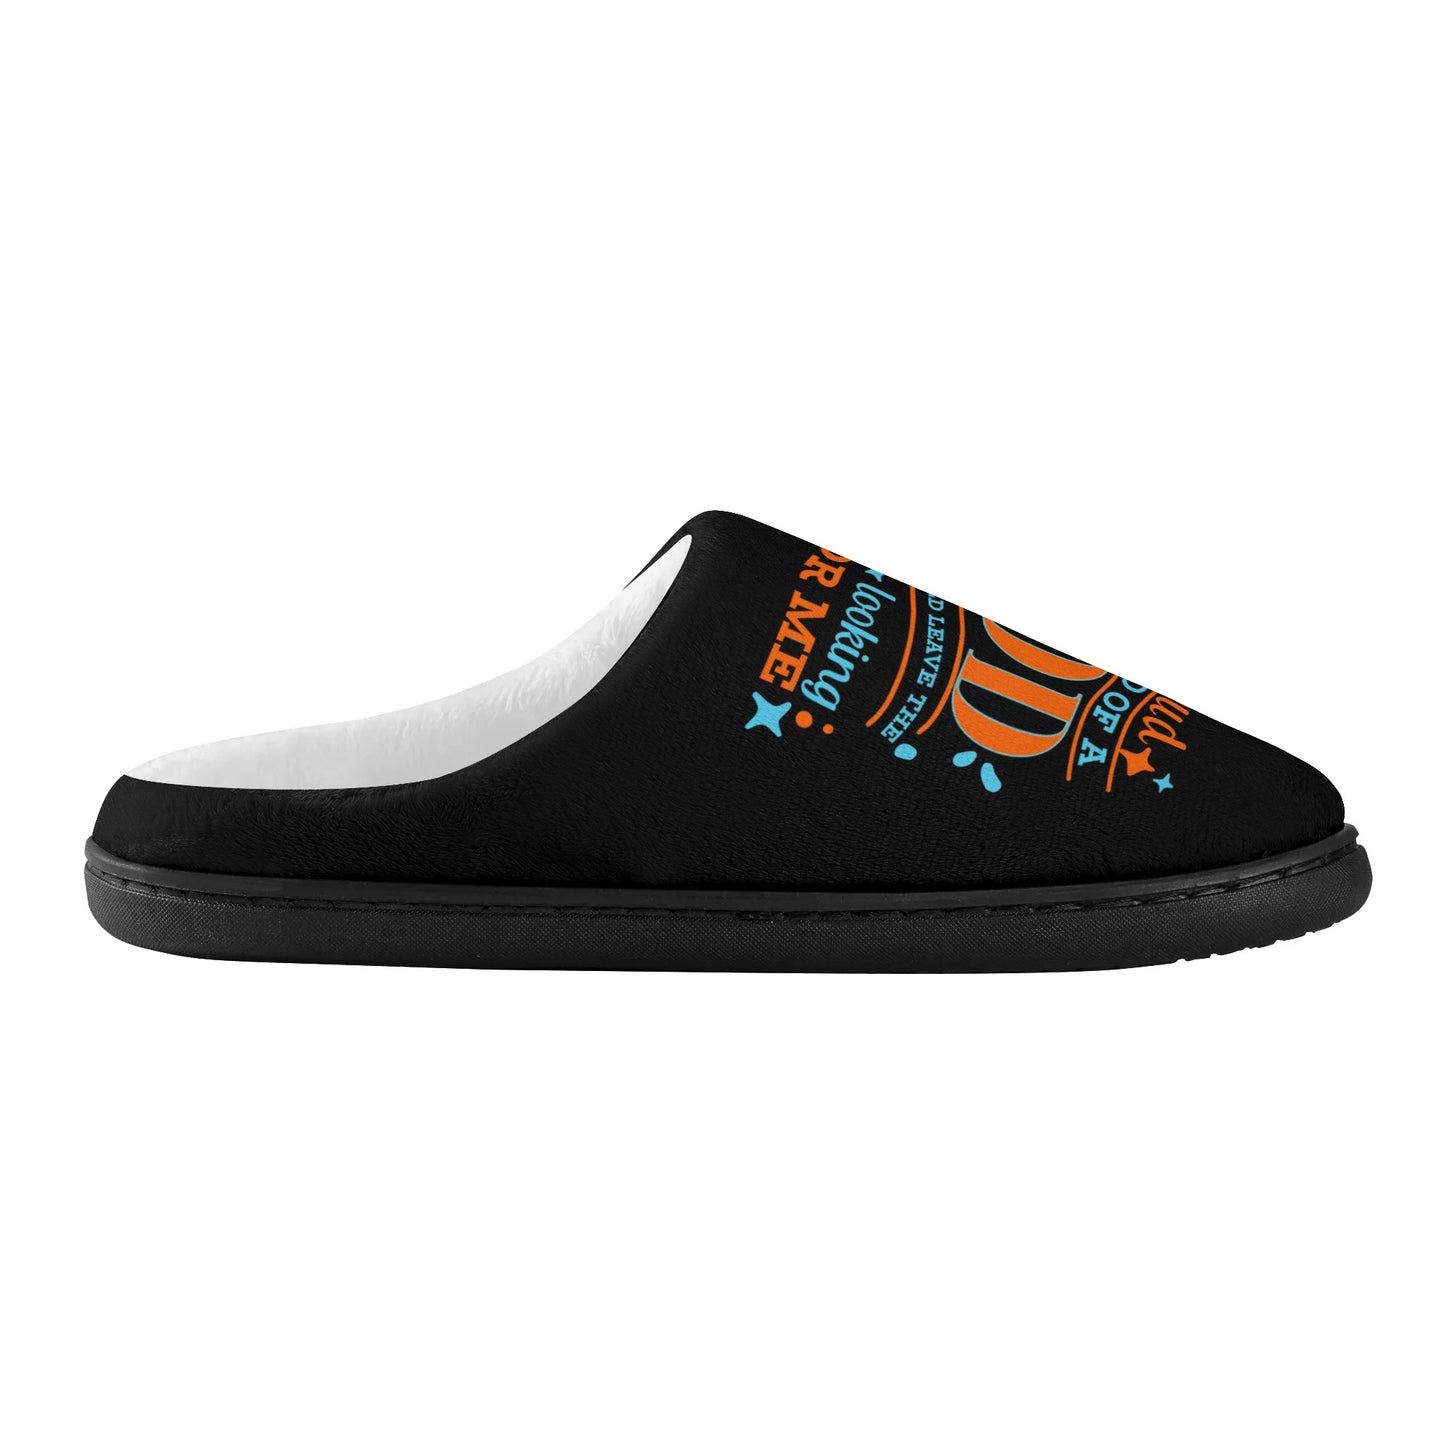 Proud Child Of A God Who Would Leave The 99 Looking For Me Unisex Rubber Autumn Christian Slipper Room Shoes popcustoms